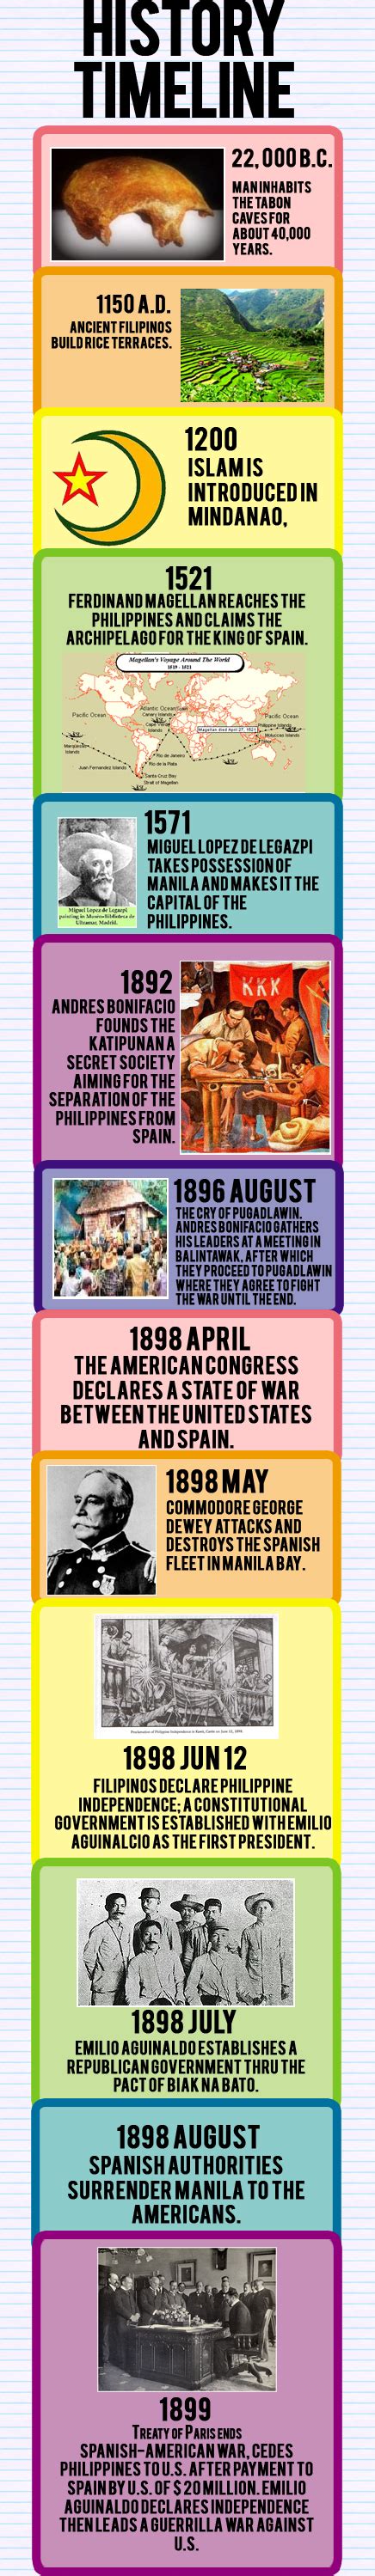 Timeline Of Philippine History In Chronological Order